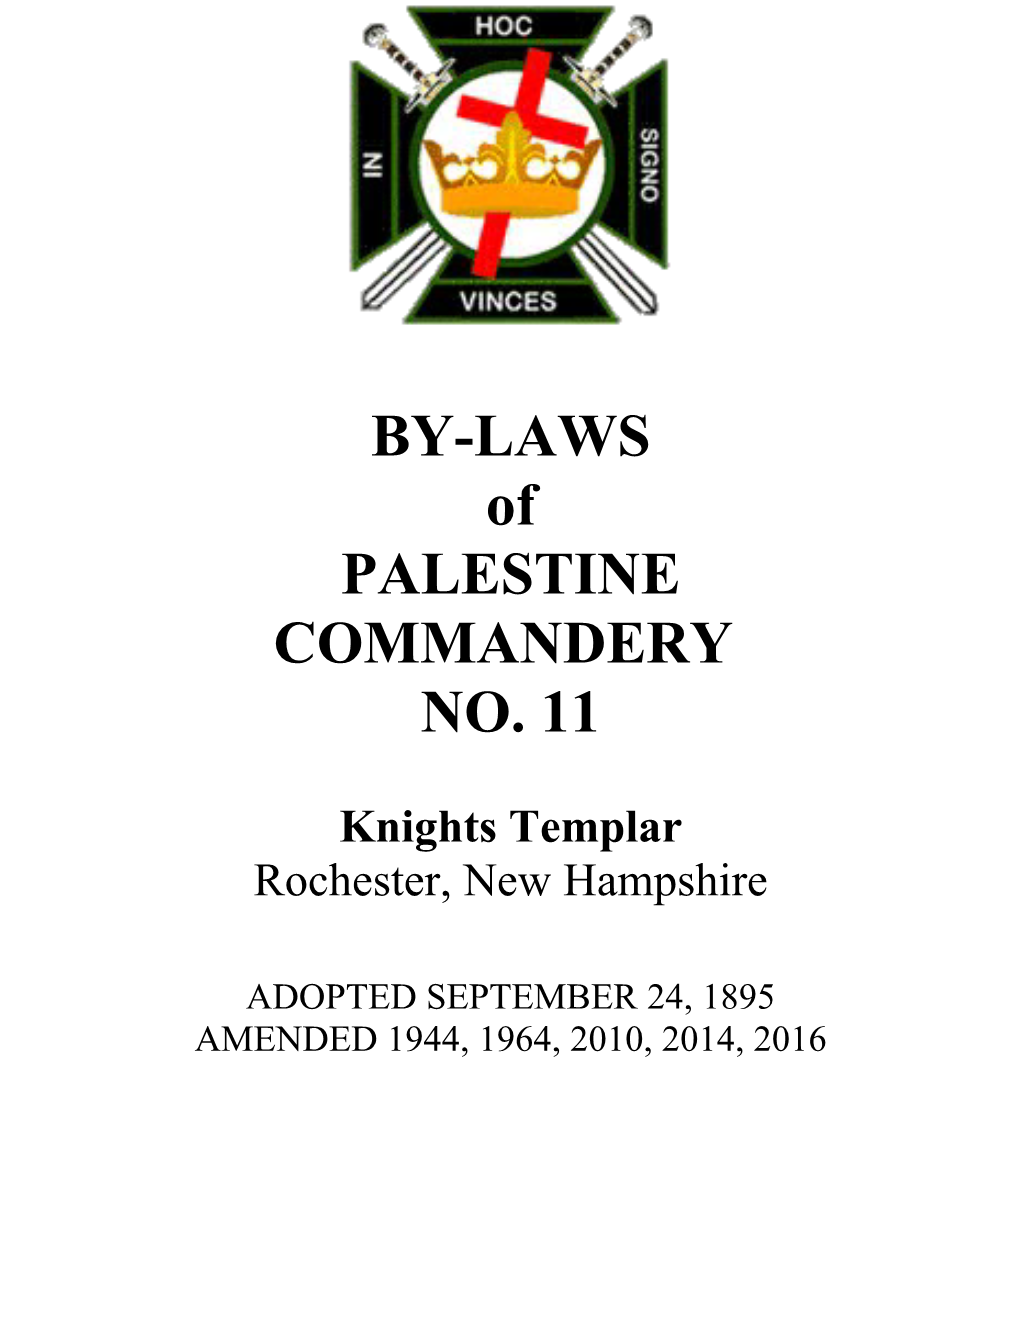 By-Laws of Palestine Commandery No. 11, Knights Templar, Rochester New Hampshire